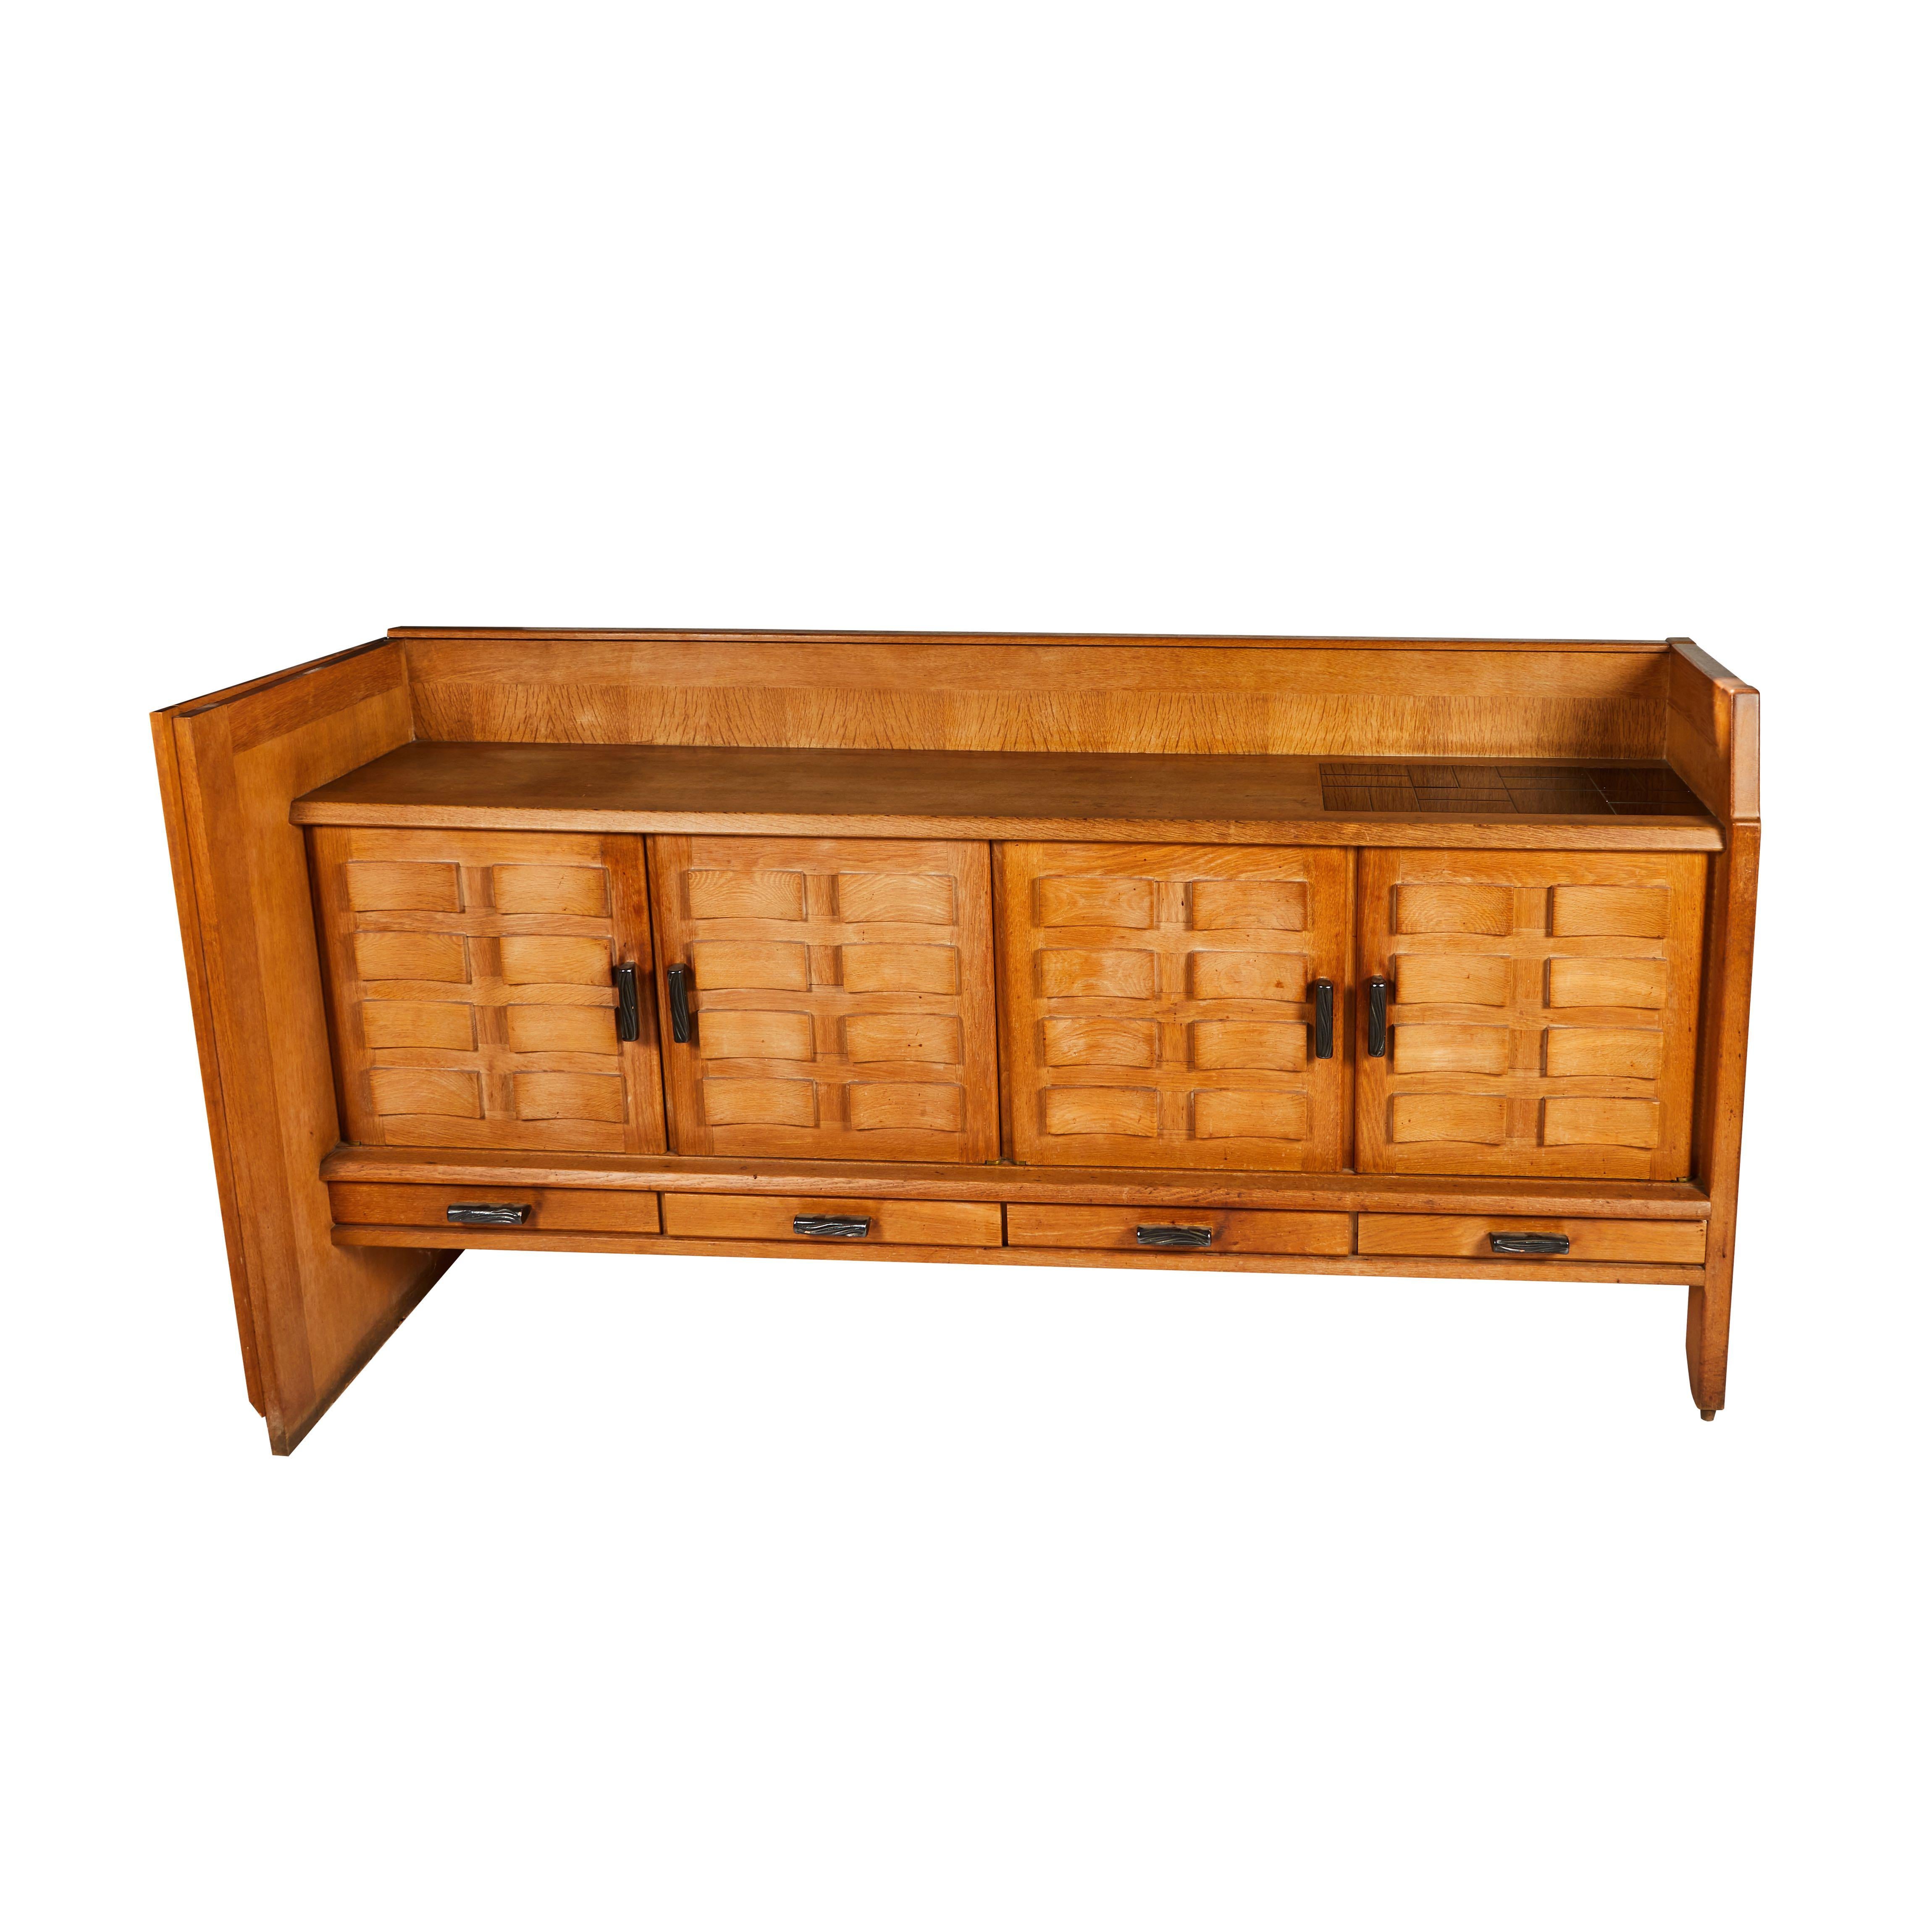 Brutalist style midcentury buffet credenza or sideboard. Large scale piece with exceptional hardware. 